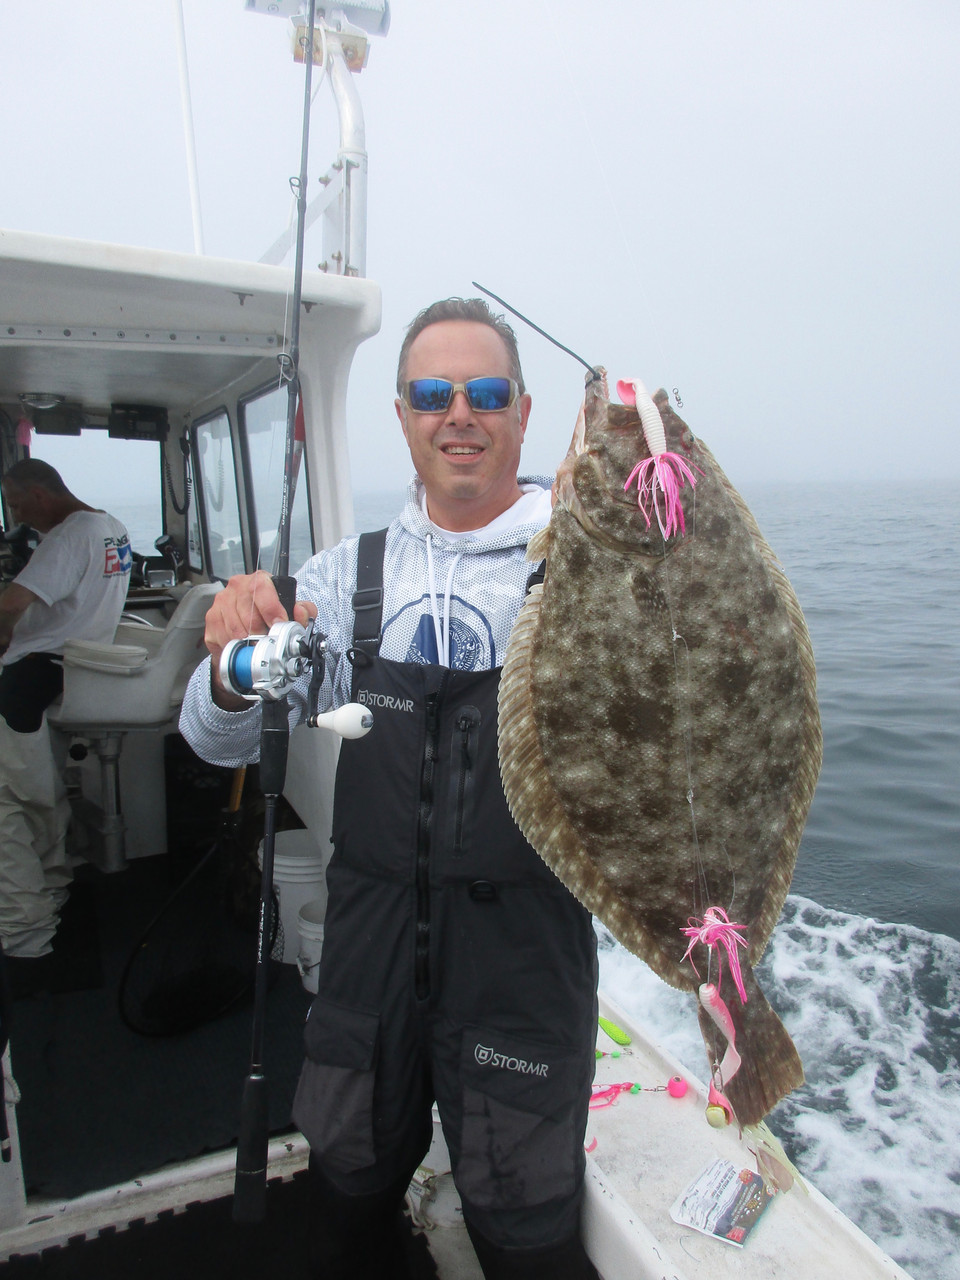 The results an 11.2 and 10.8 many 8's a few 9's. Drop and reel fishing the Fluke literally would not leave this alone.  I had fish every single drop - we boxed 35 keepers by 1030AM this past Tuesday July 18th aboard the Kattie B